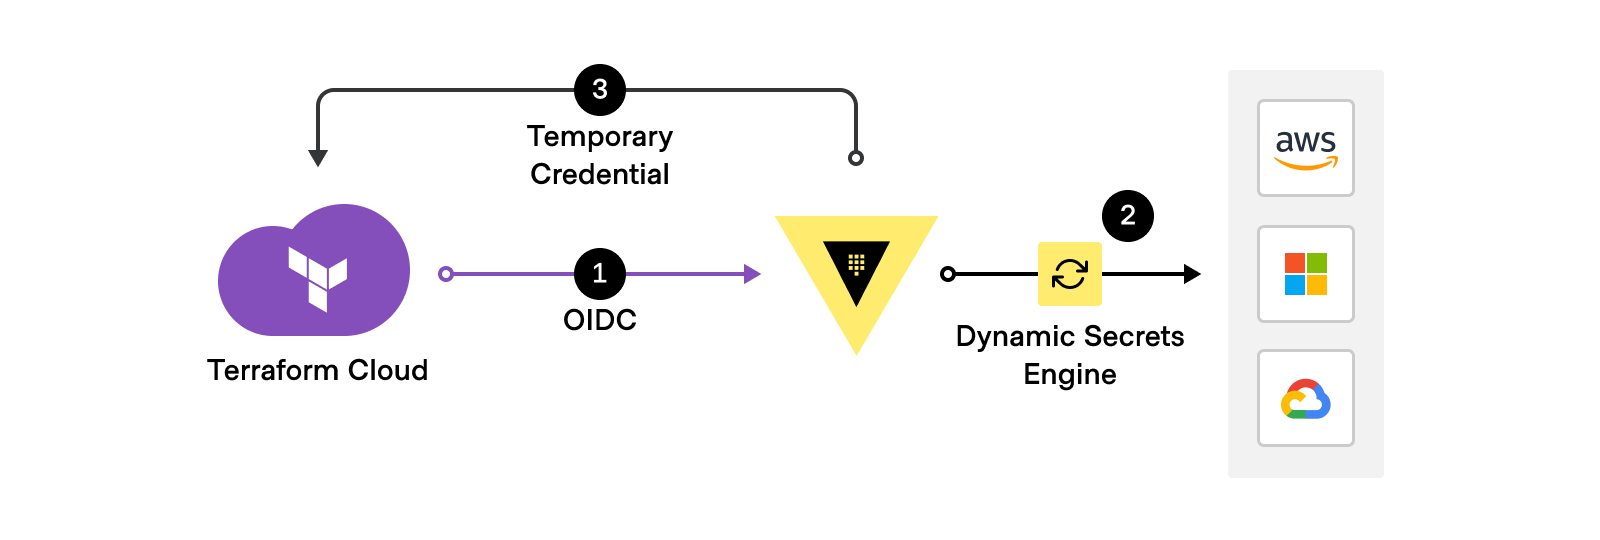 Vault-backed dynamic credentials authenticates to Vault with OIDC, then uses Vault secrets engines to generate cloud credentials for Terraform Cloud runs.